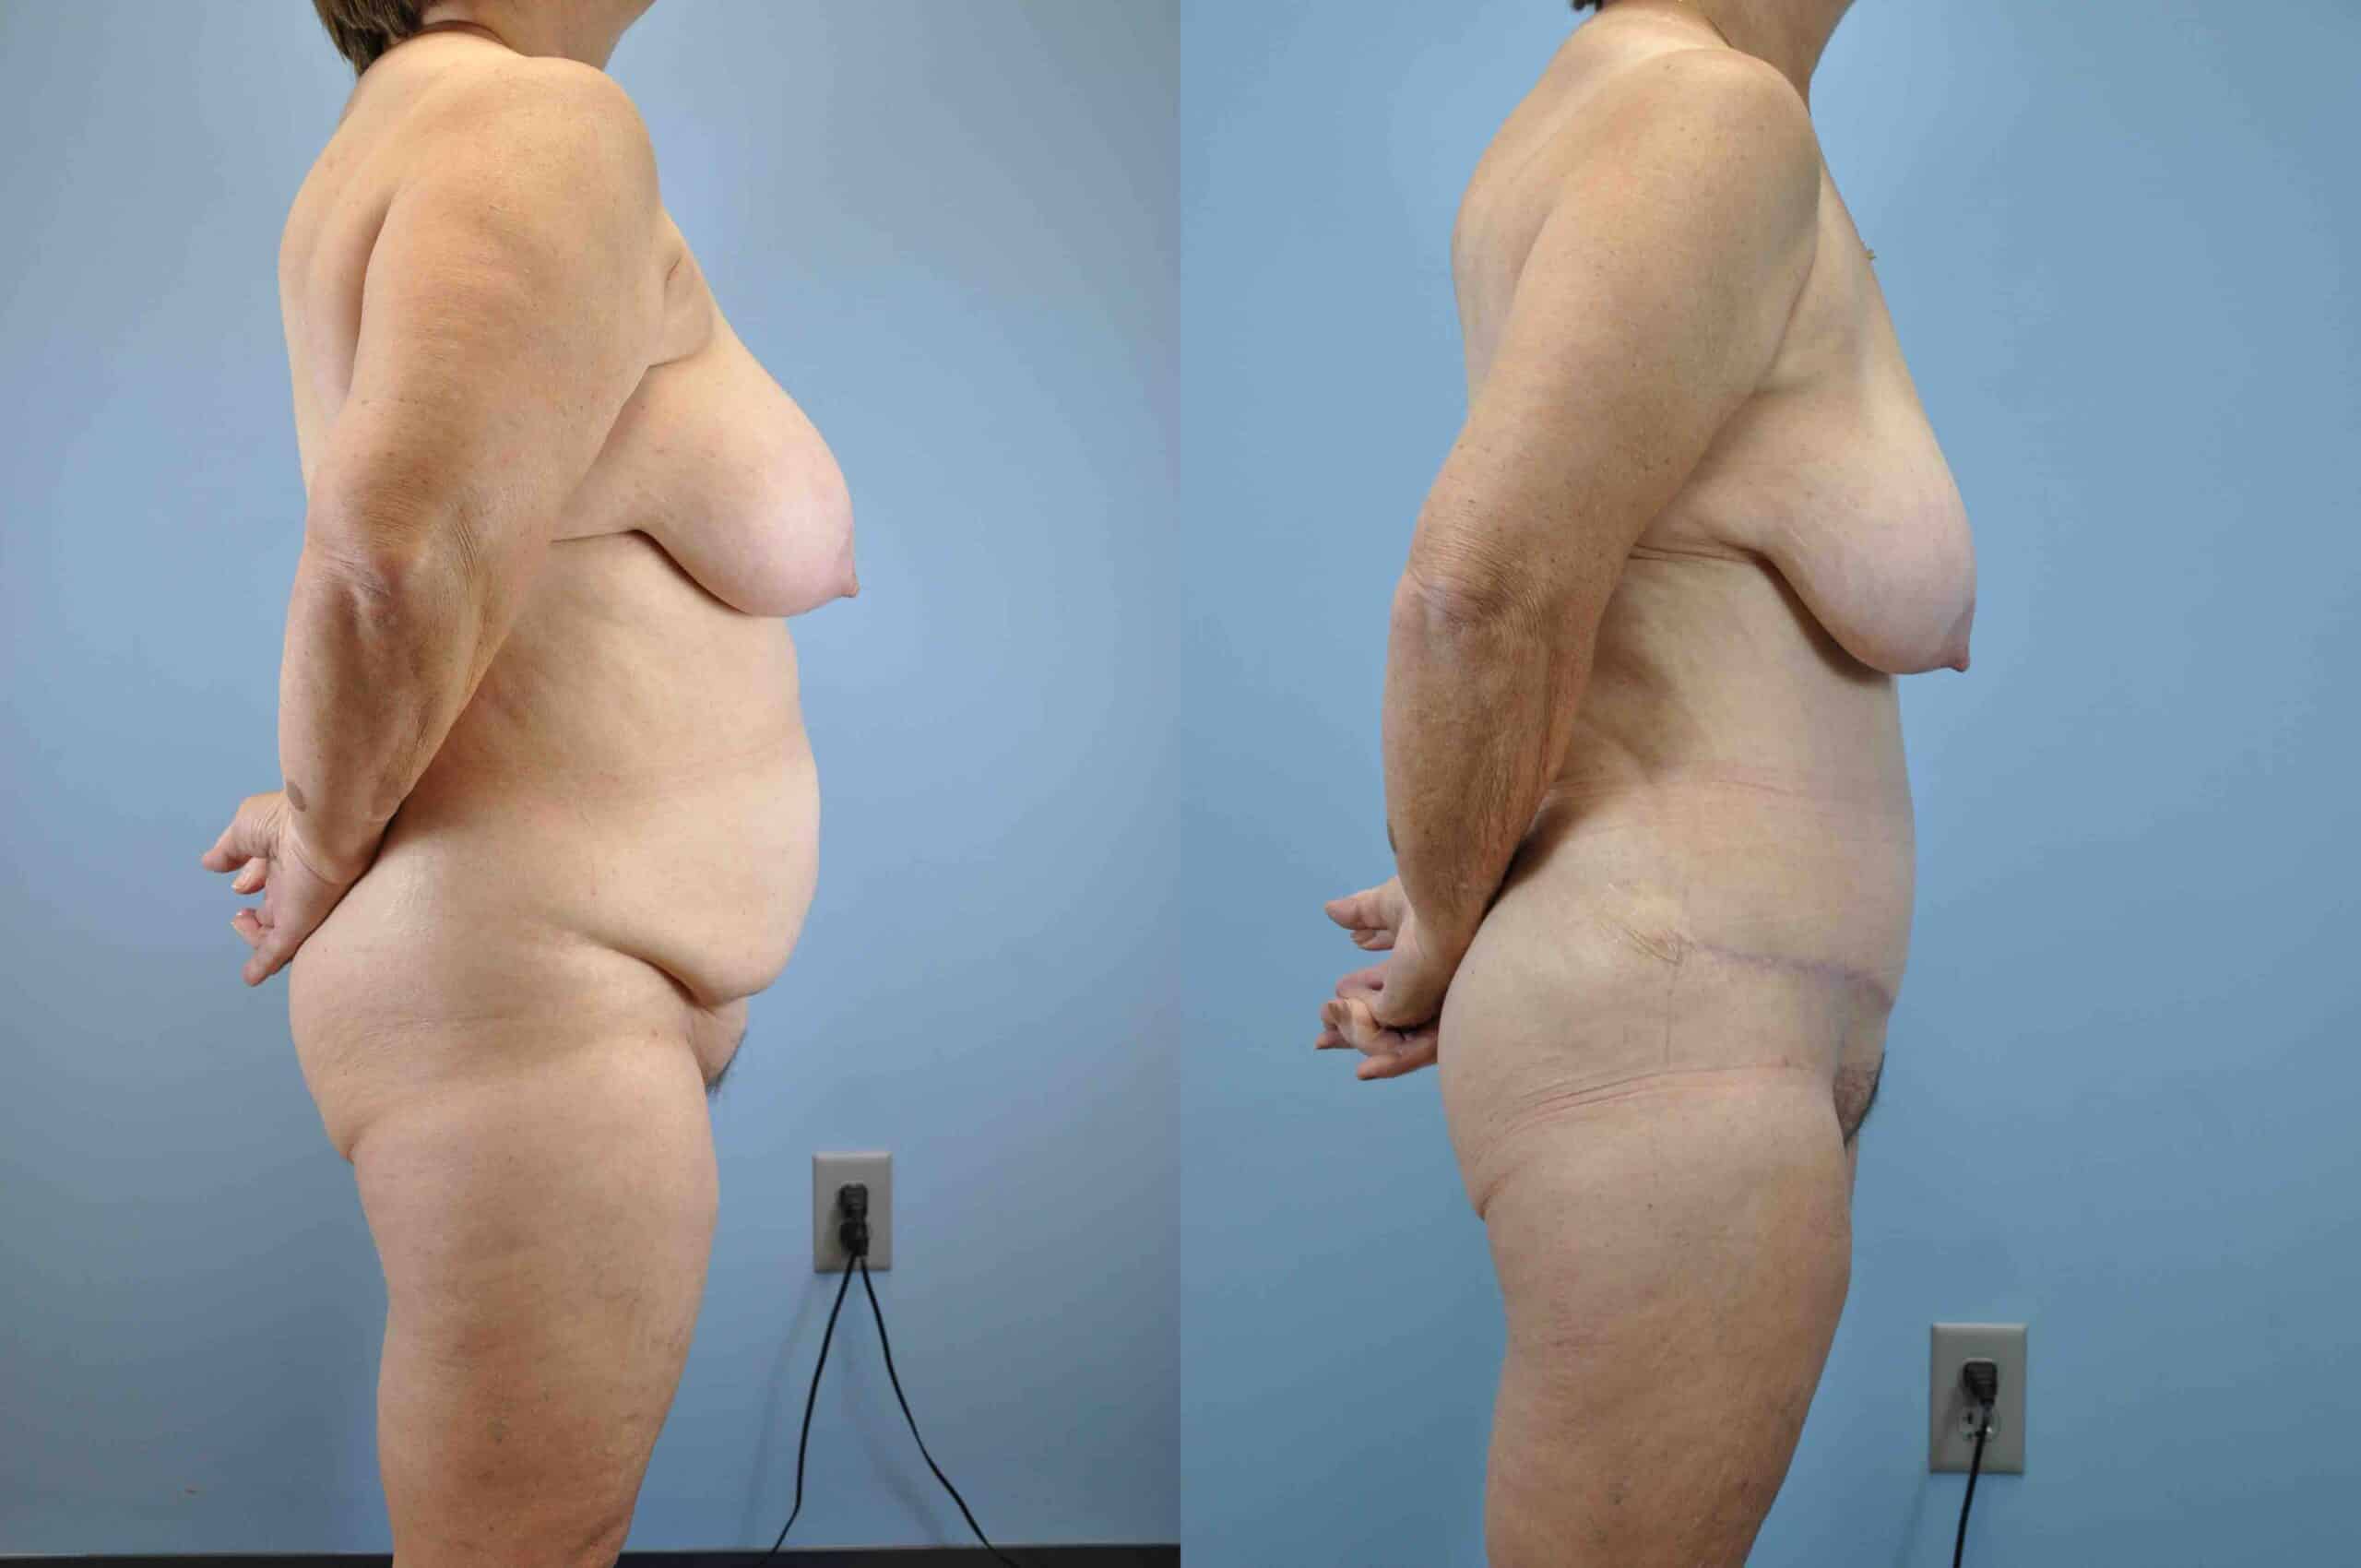 Before and after, patient 6 mo post op from VASER Abdomen, Flanks, Mons, Tummy Tuck procedures performed by Dr. Paul Vanek